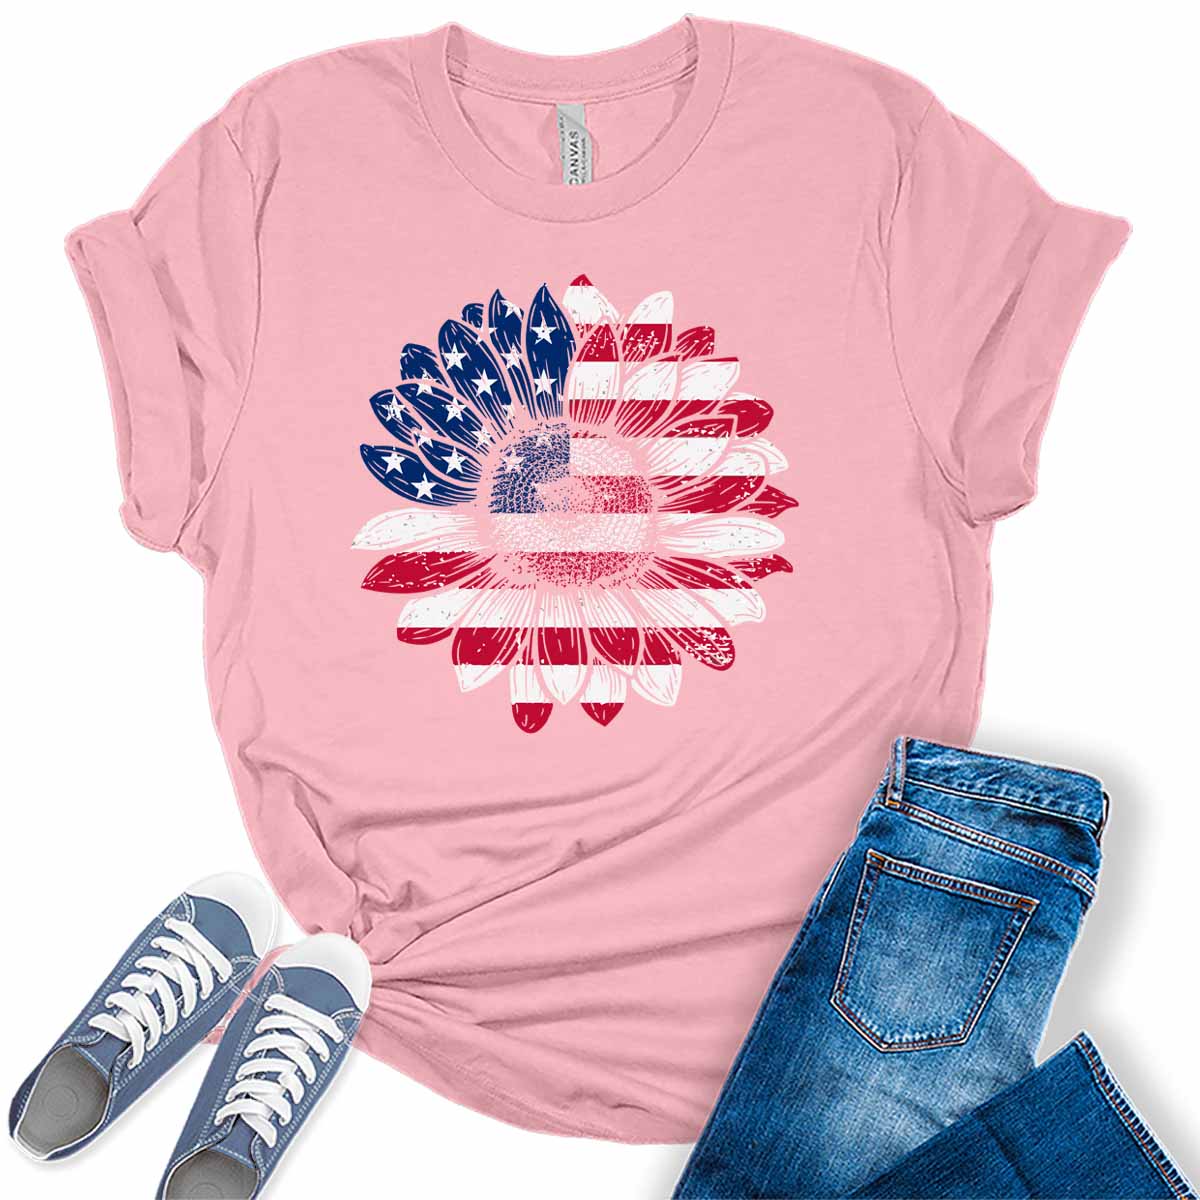 Sunflower American Flag Patriotic Women's 4th Of July Graphic Tee